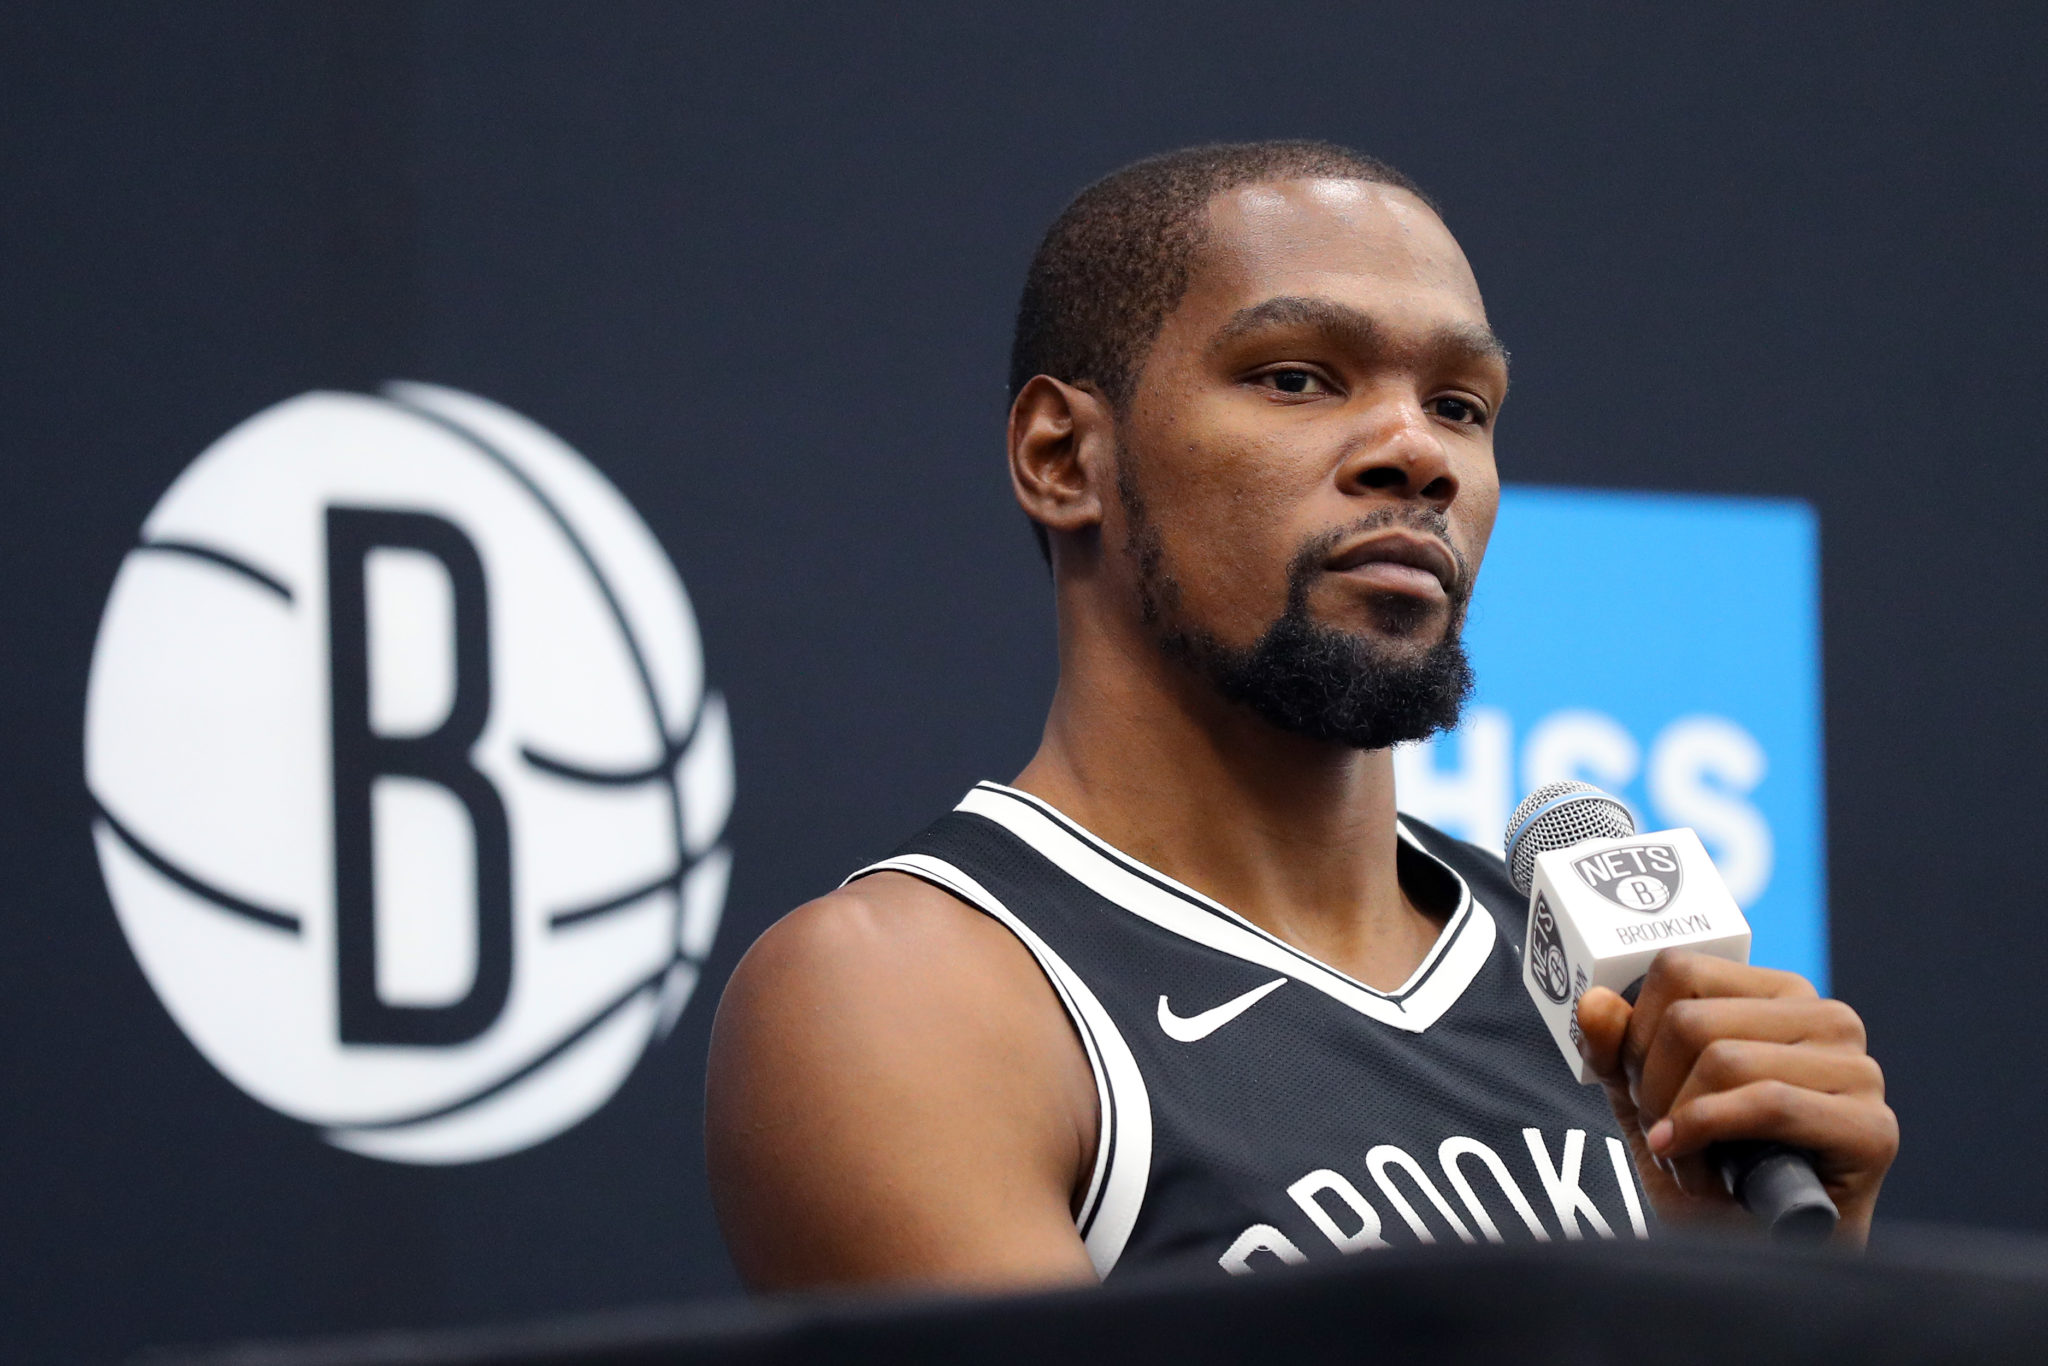 NBA news: In latest training session Kevin durant looks healthy